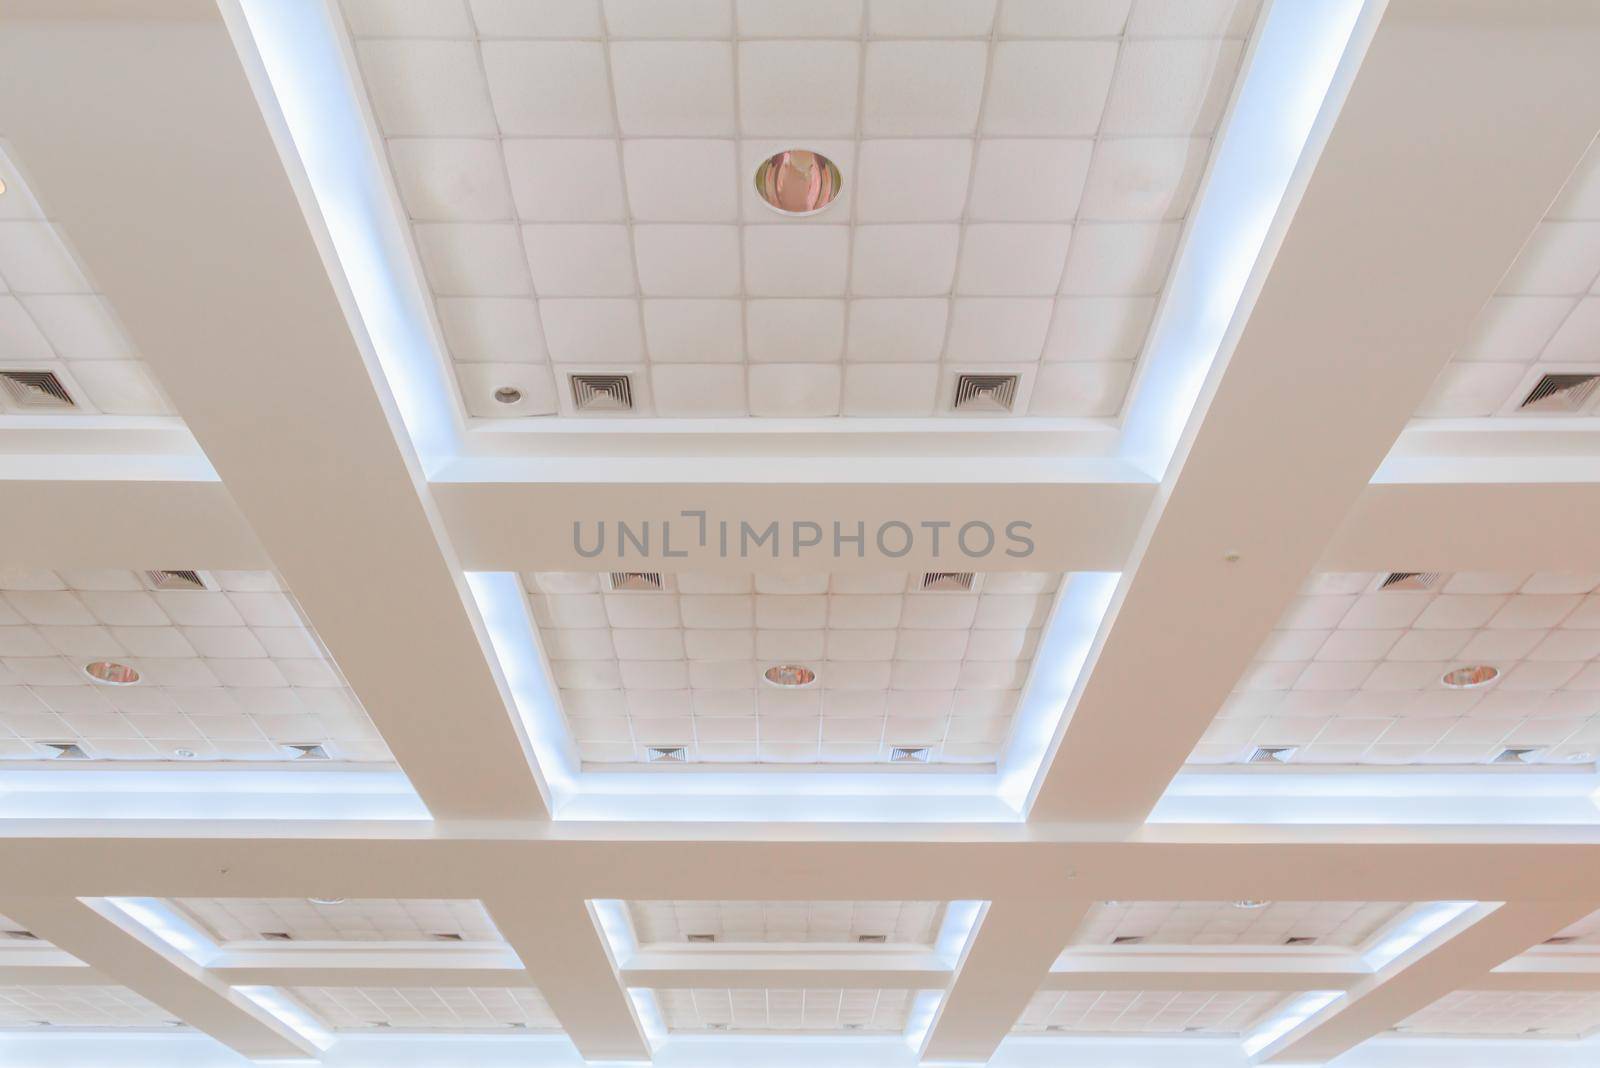 ceiling gypsum of business interior office building and light neon. style monochrome with copy space add text by pramot